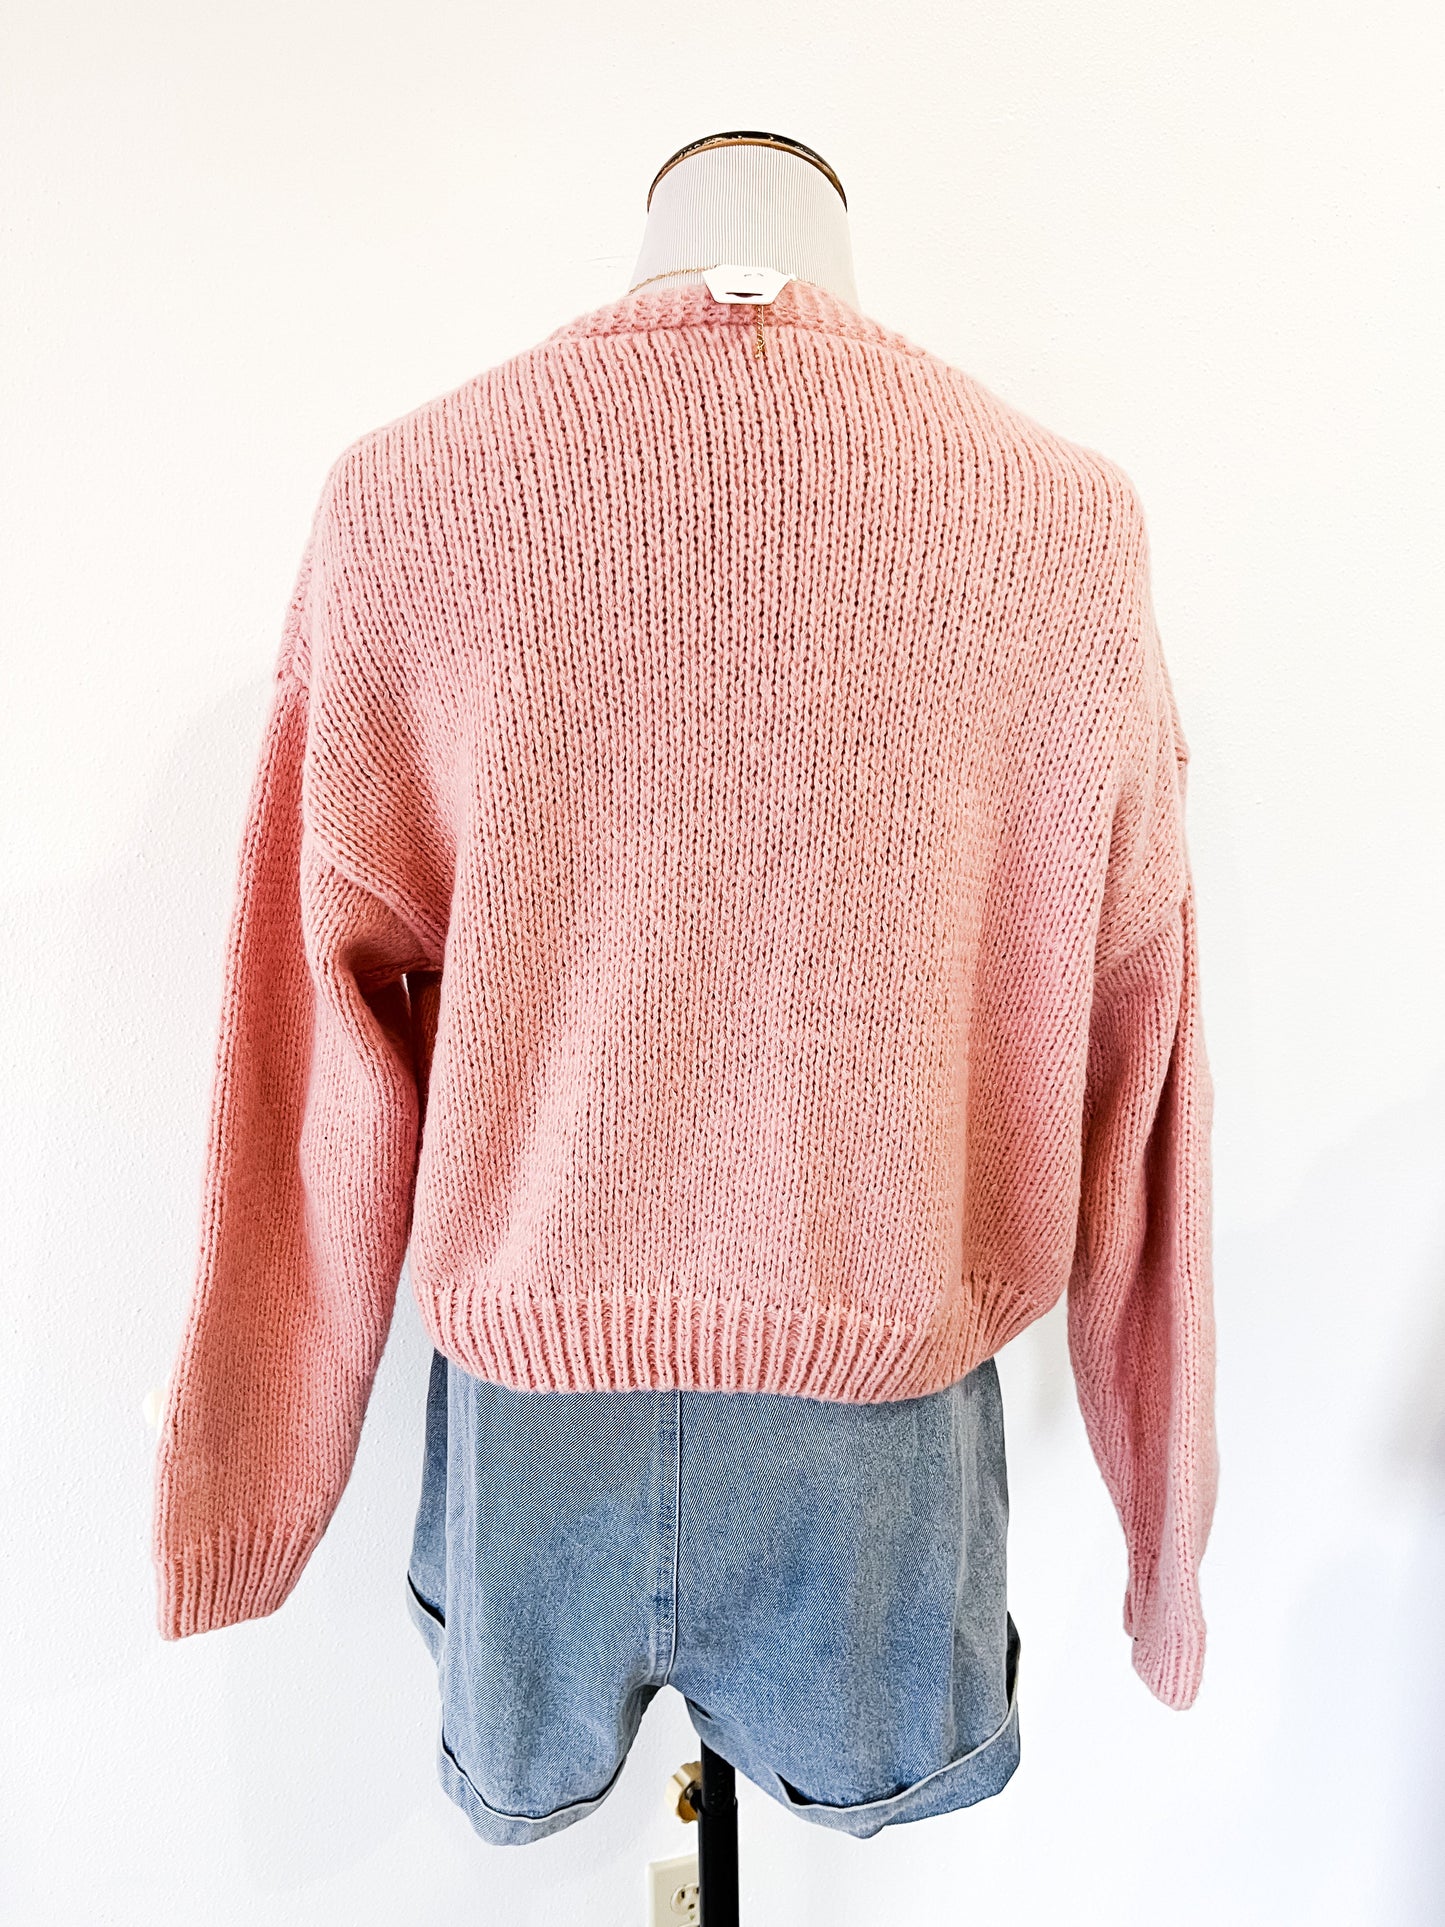 Loverly Pink Heart Cropped Cardigan